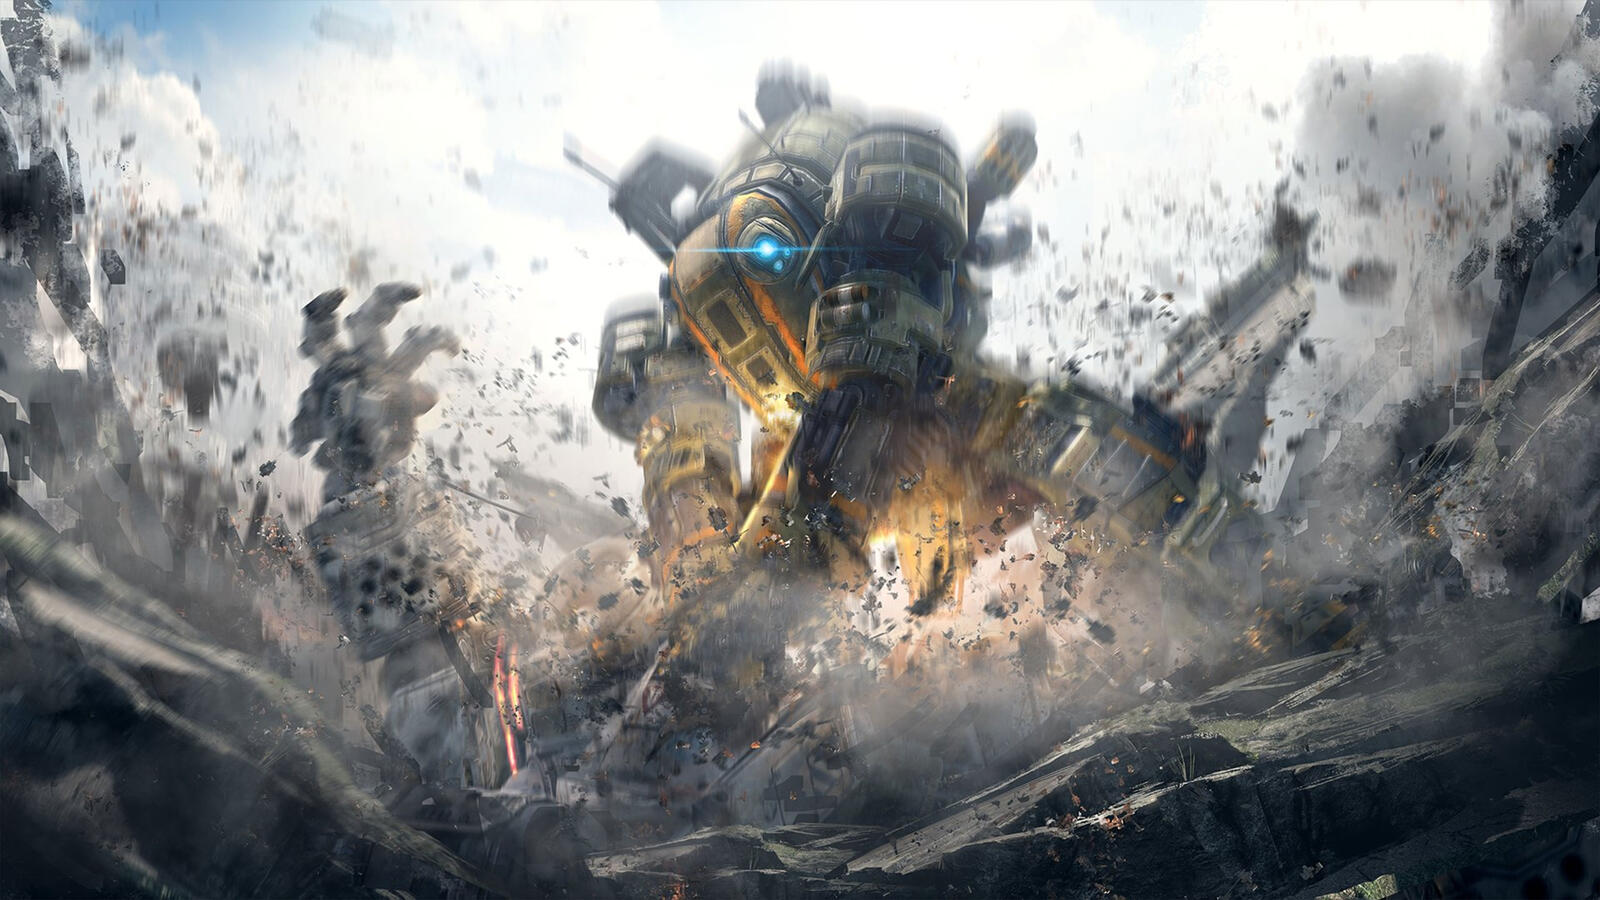 Wallpapers titanfall 2 Xbox games 2016 games on the desktop